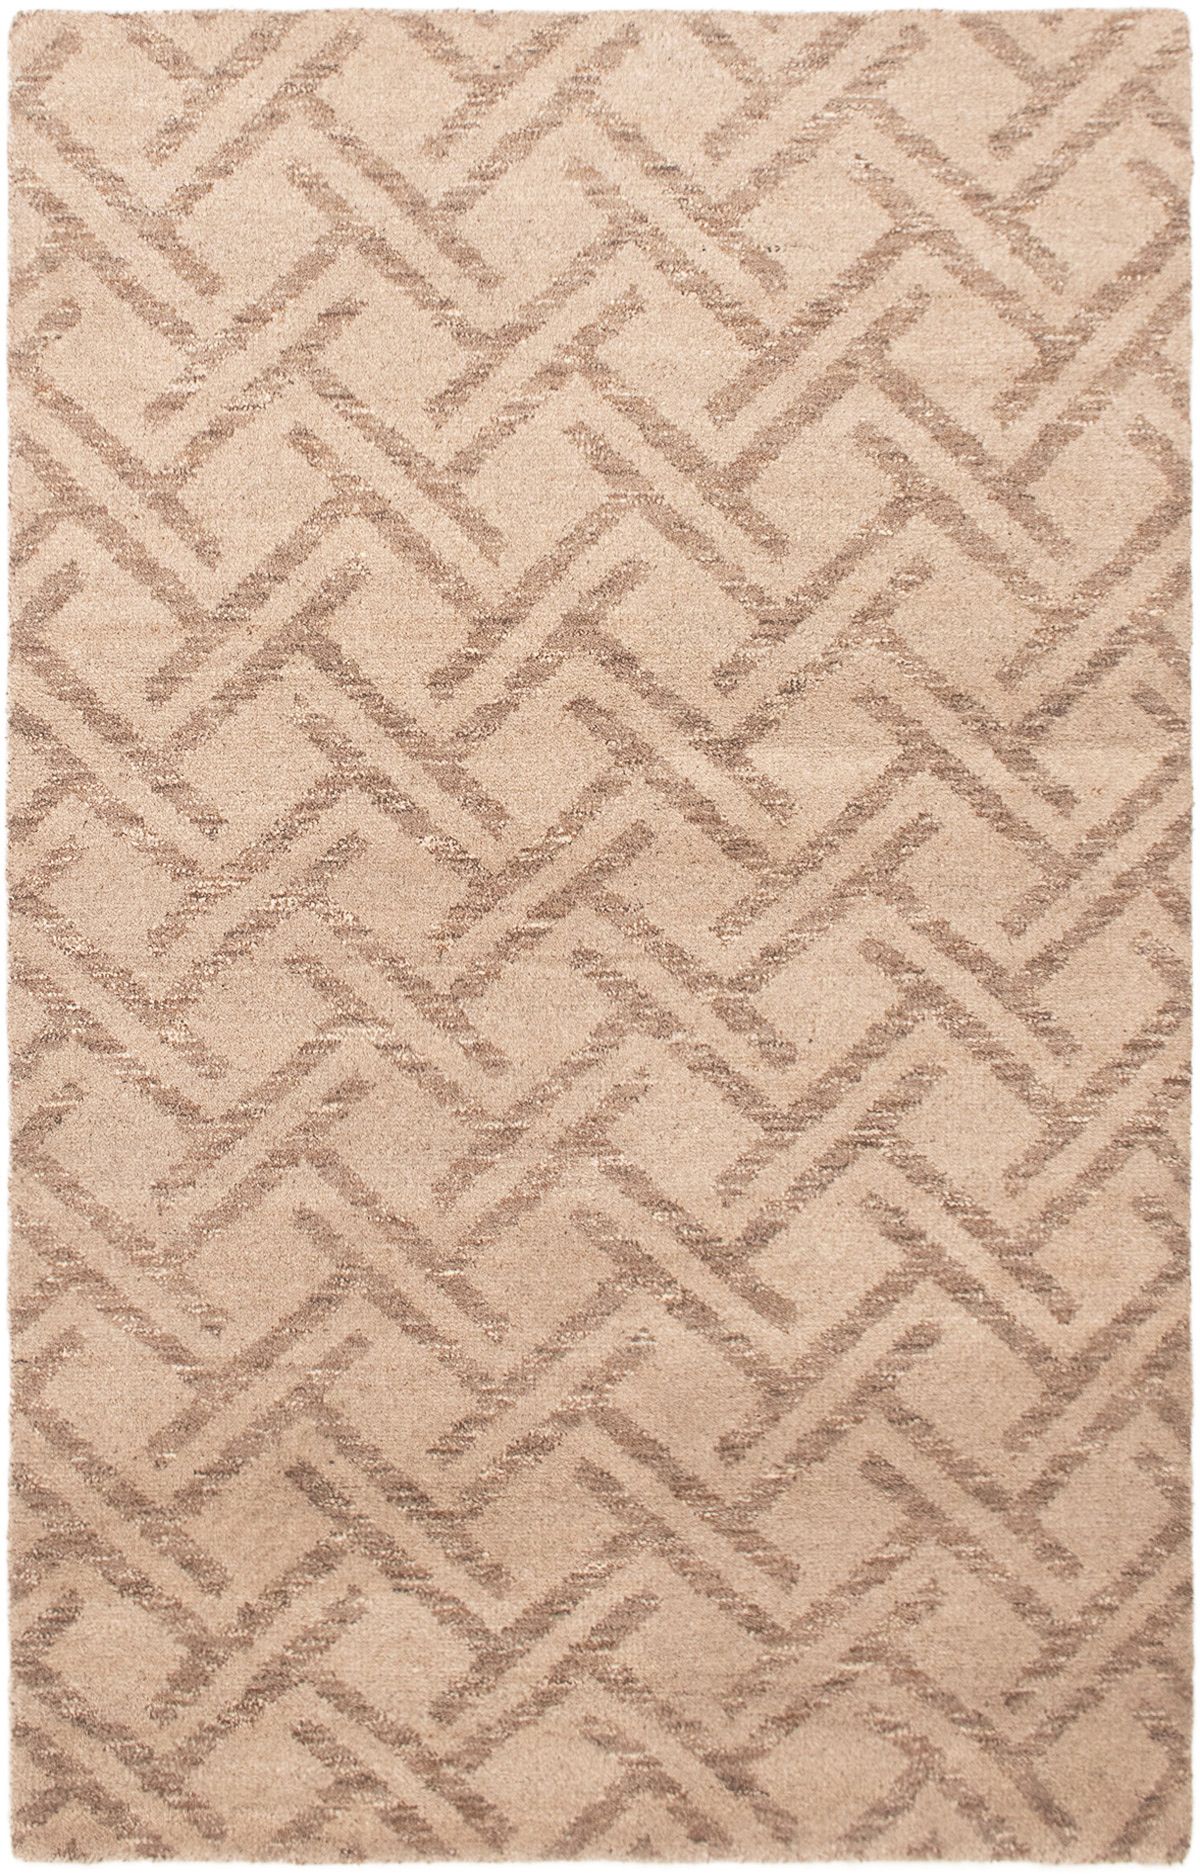 Hand-knotted Tangier Tan Wool Rug 5'2" x 8'1" Size: 5'2" x 8'1"  